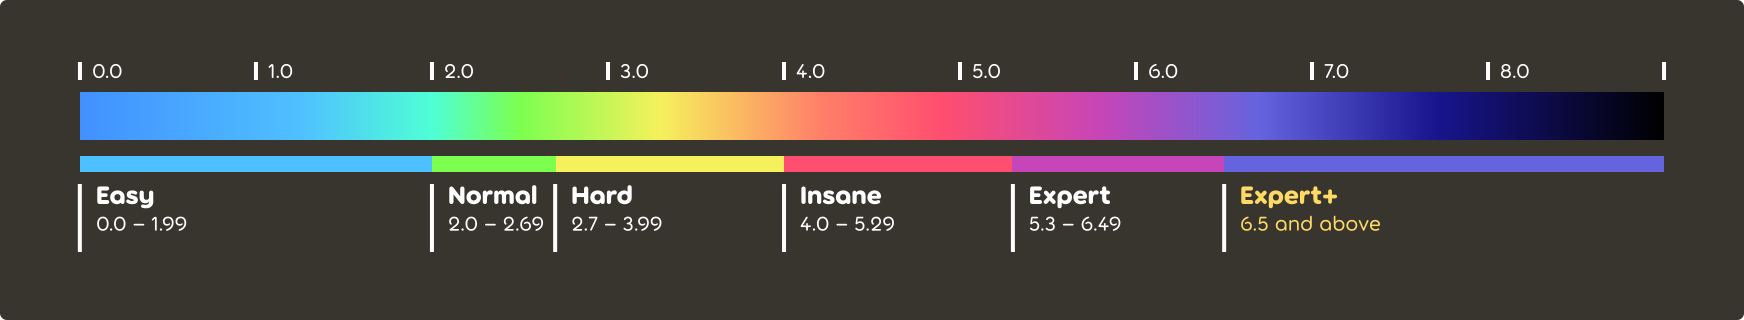 osu! difficulty rating colour spectrum